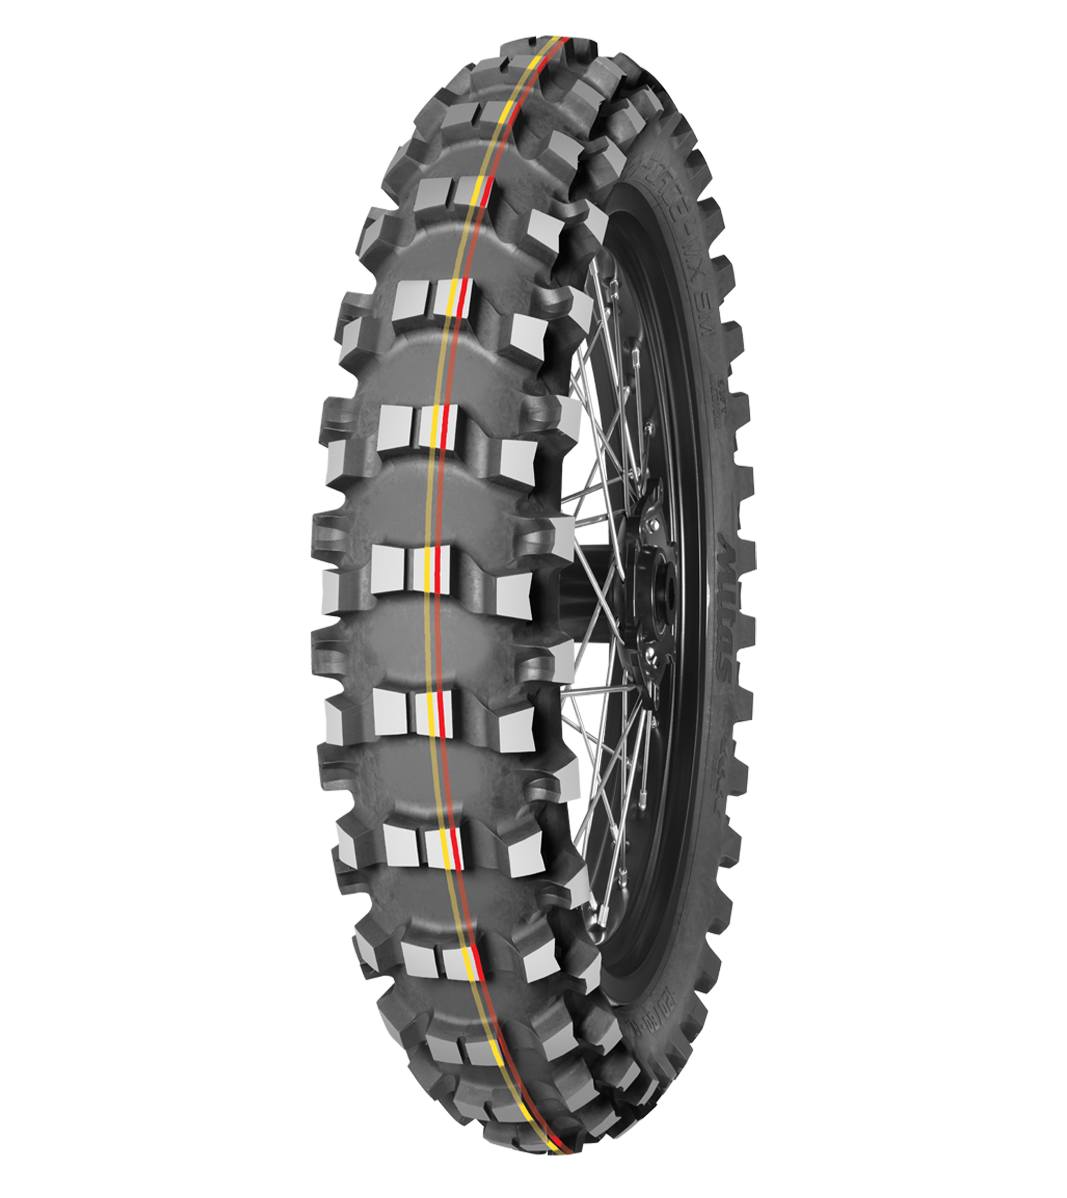 Mitas TERRA FORCE-MX SM 80/100-12 Motocross Competition Off-Road SOFT TO MEDIUM 50M Red &amp; Yellow Tube Rear Tire, 226004, 80/100-12, Motocross, Motocross Competition, Off-Road, Rear, Terra Force, Terra Force-MX SM, Trail, Tires - Imported and distributed in North &amp; South America by Lindeco Genuine Powersports - Premier Powersports Equipment and Accessories for Motorcycle Enthusiasts, Professional Riders and Dealers.